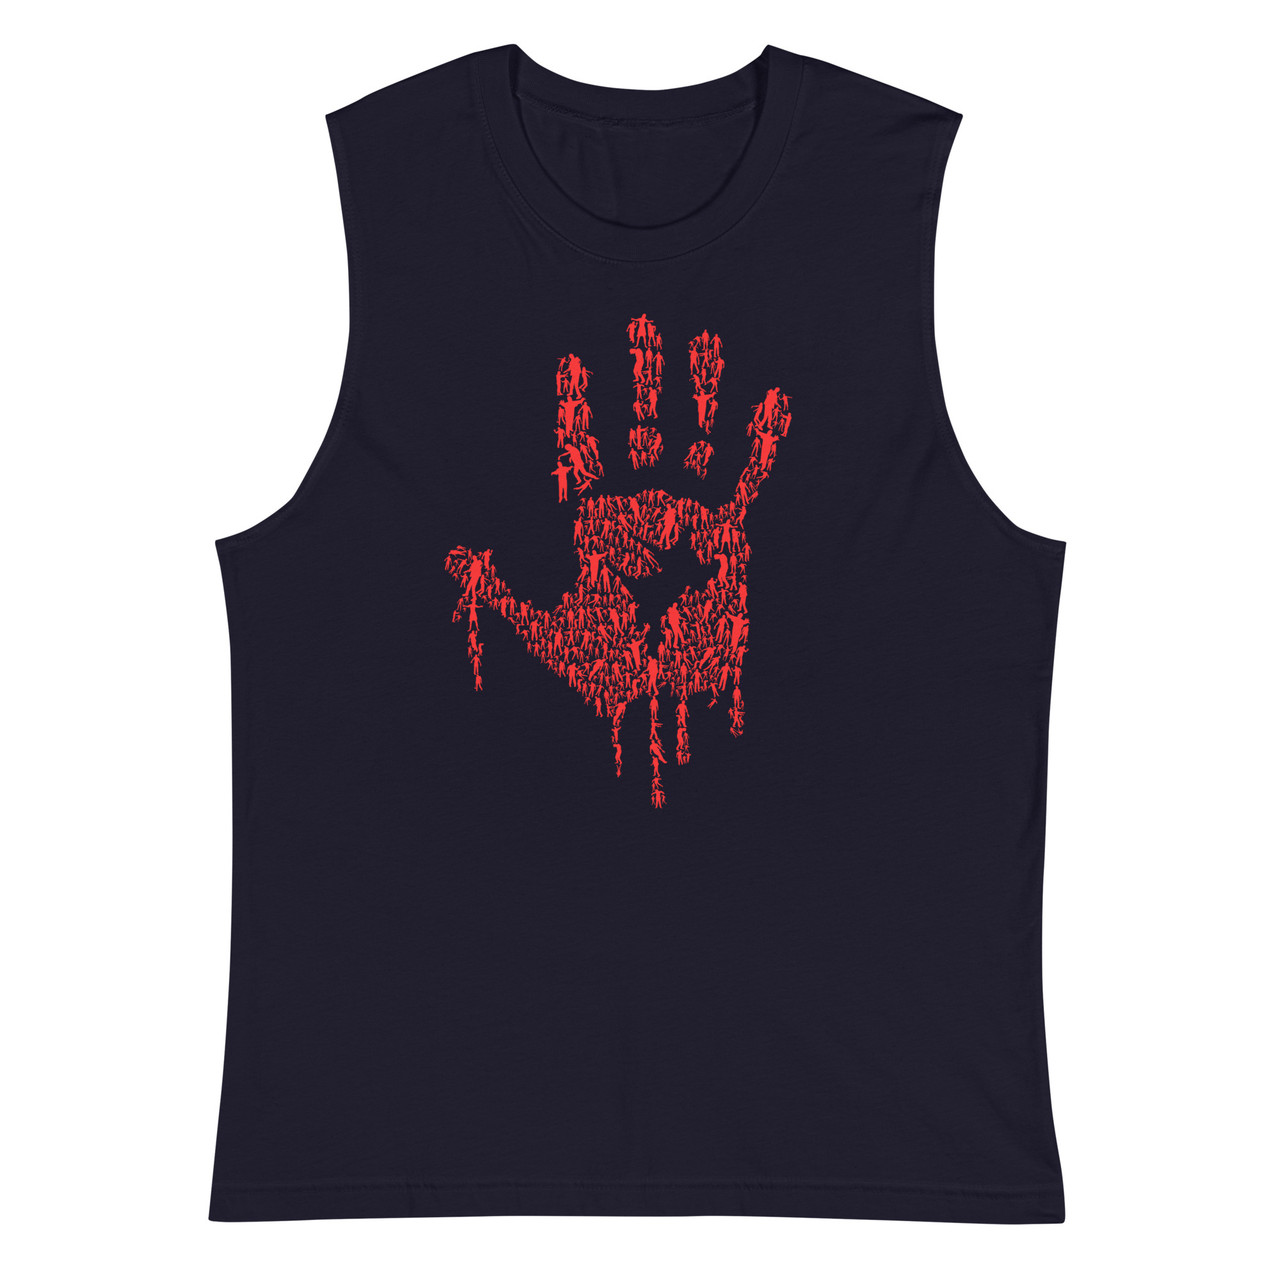 Hand of Zombies Unisex Muscle Shirt - Bella + Canvas 3483 